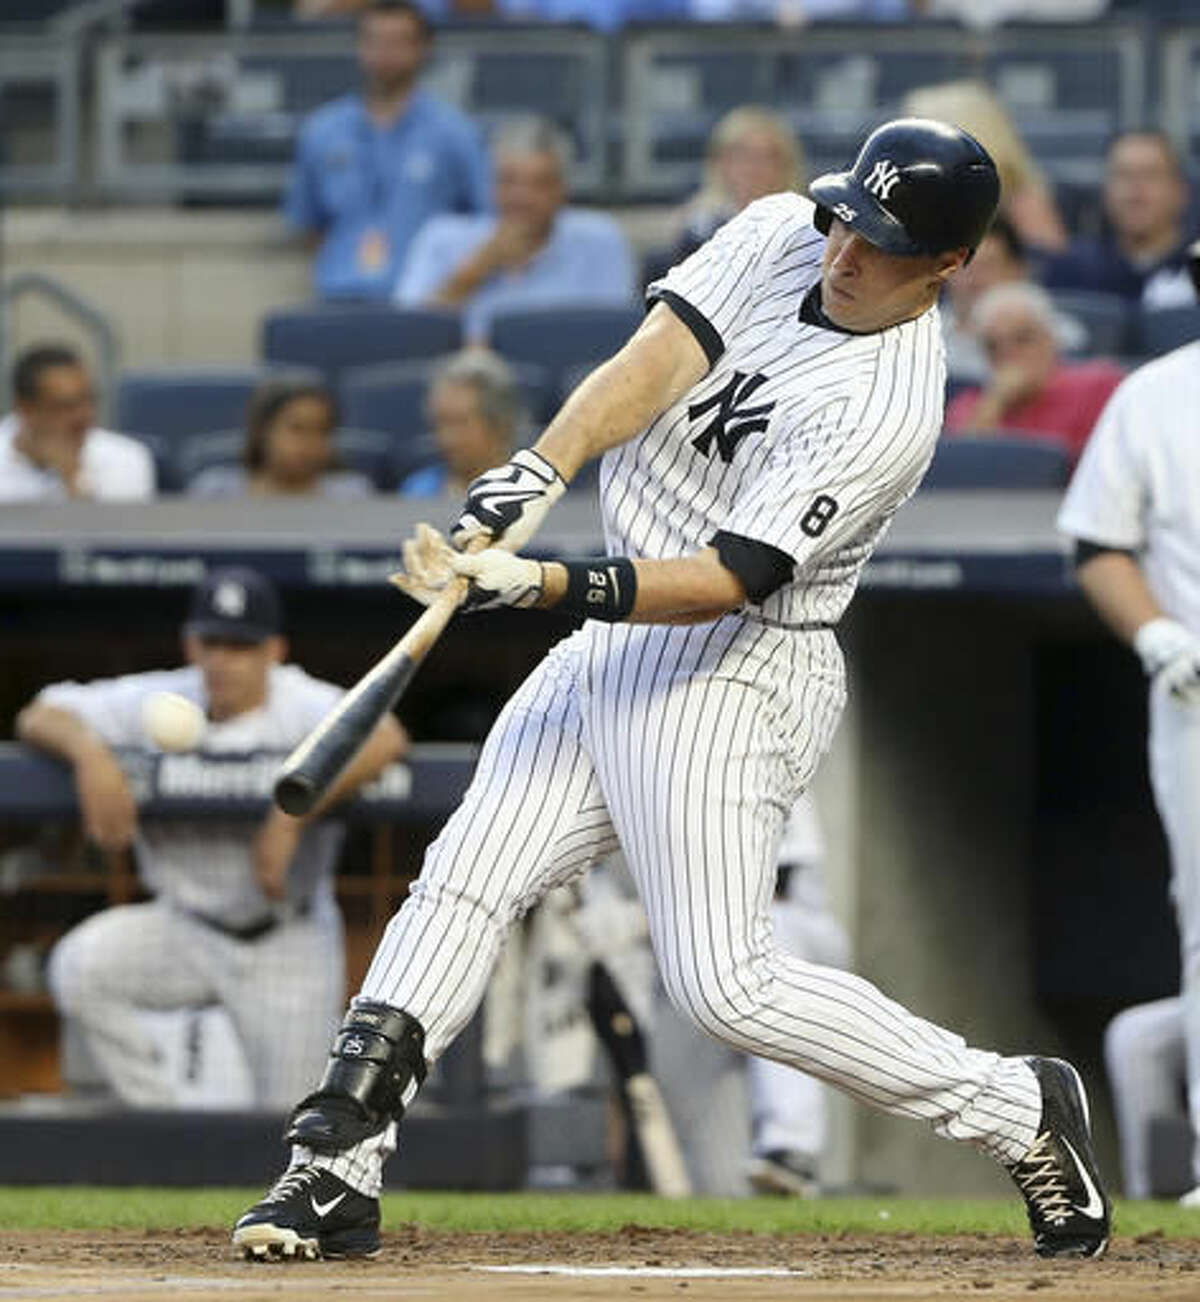 Brian McCann and Mark Teixeira are becoming family